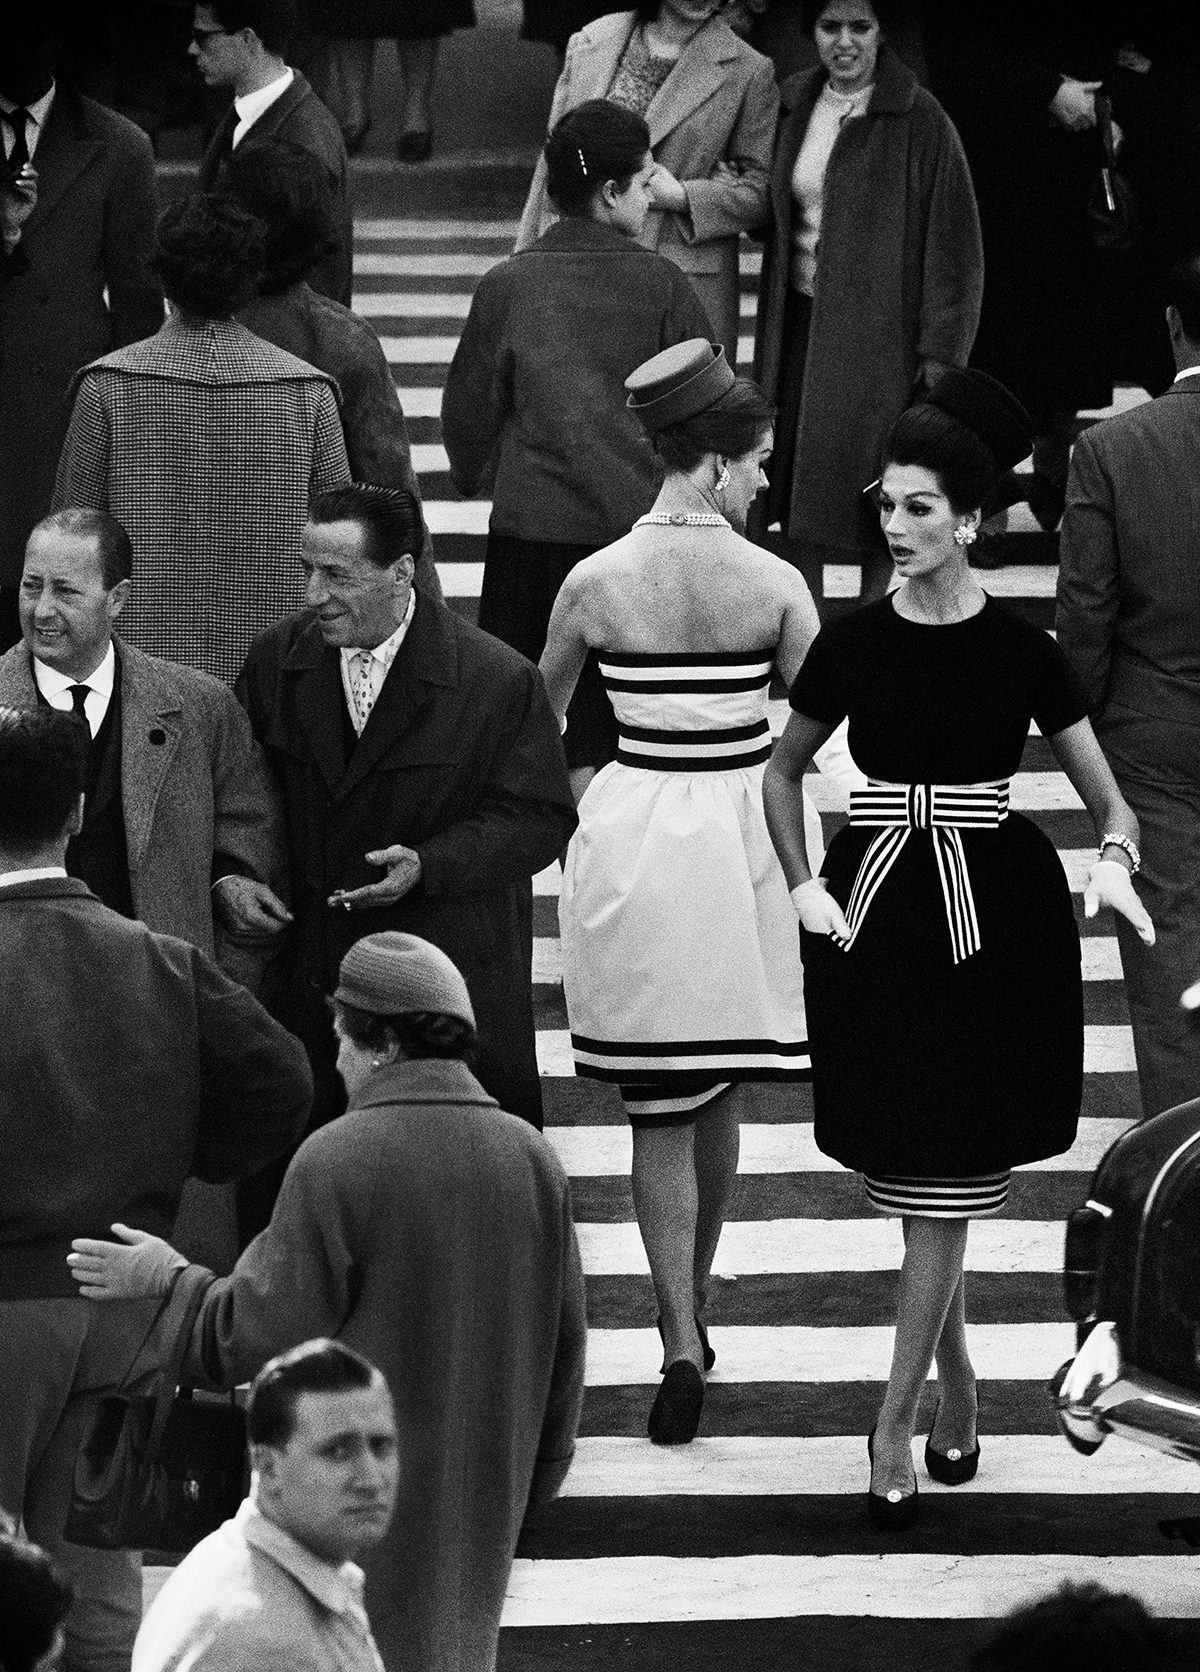 Black and white photograph of two women crossing each other on a busy pedestrian crossing, as part of the new William Klein exhibition called YES at the ICP